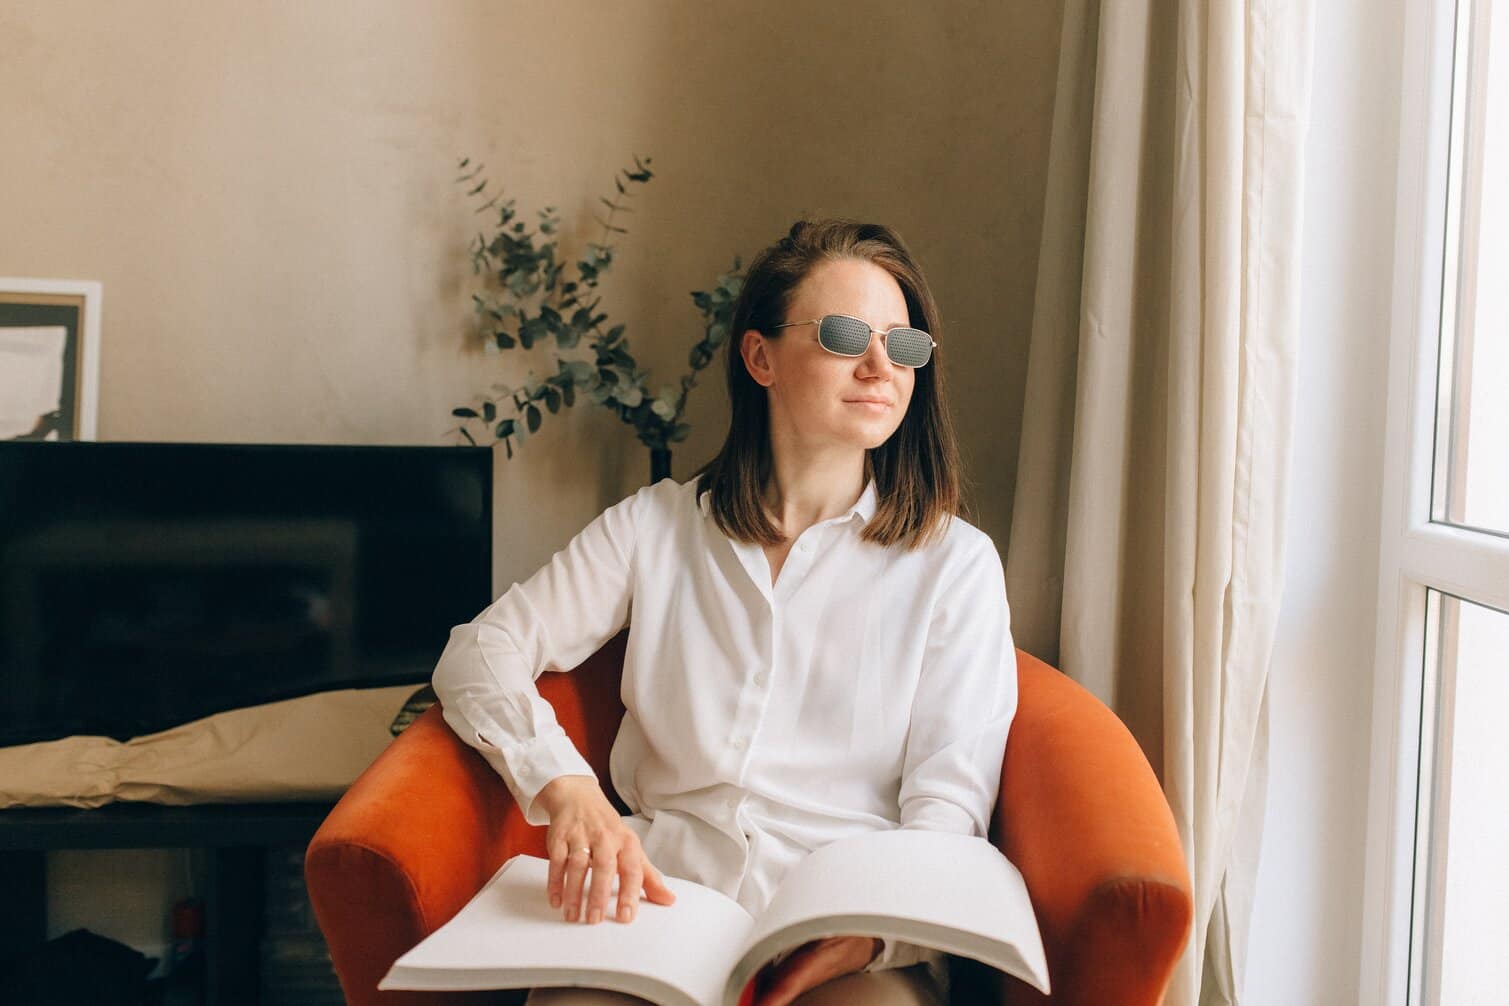 A lady with a white blouse and shoulder length dark hair, she is sat on a orange confutable chair. She is looking out of her window absorbing the sunlight. She has dark glasses on and has her left hand on her brail book. She is reading about the benefits of sight loss counselling.